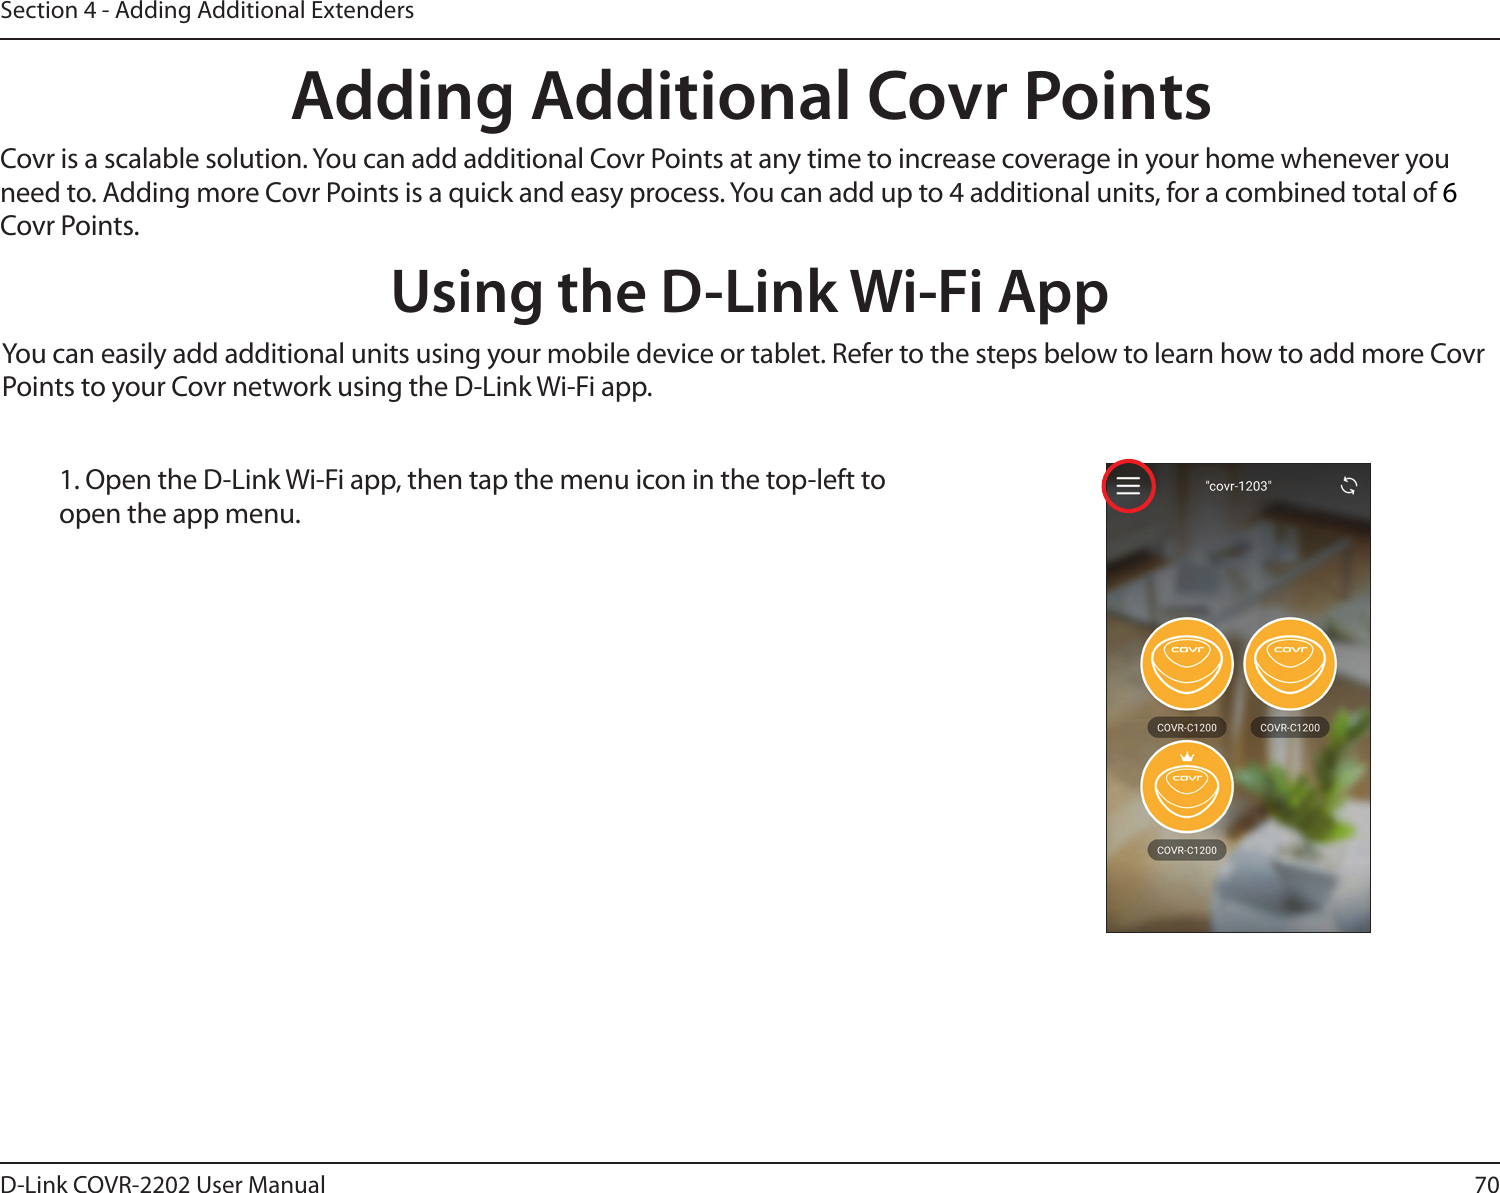 70D-Link COVR-2202 User ManualSection 4 - Adding Additional ExtendersAdding Additional Covr PointsCovr is a scalable solution. You can add additional Covr Points at any time to increase coverage in your home whenever you need to. Adding more Covr Points is a quick and easy process. You can add up to 4 additional units, for a combined total of 6 Covr Points.Using the D-Link Wi-Fi AppYou can easily add additional units using your mobile device or tablet. Refer to the steps below to learn how to add more Covr Points to your Covr network using the D-Link Wi-Fi app.1. Open the D-Link Wi-Fi app, then tap the menu icon in the top-left to open the app menu. 